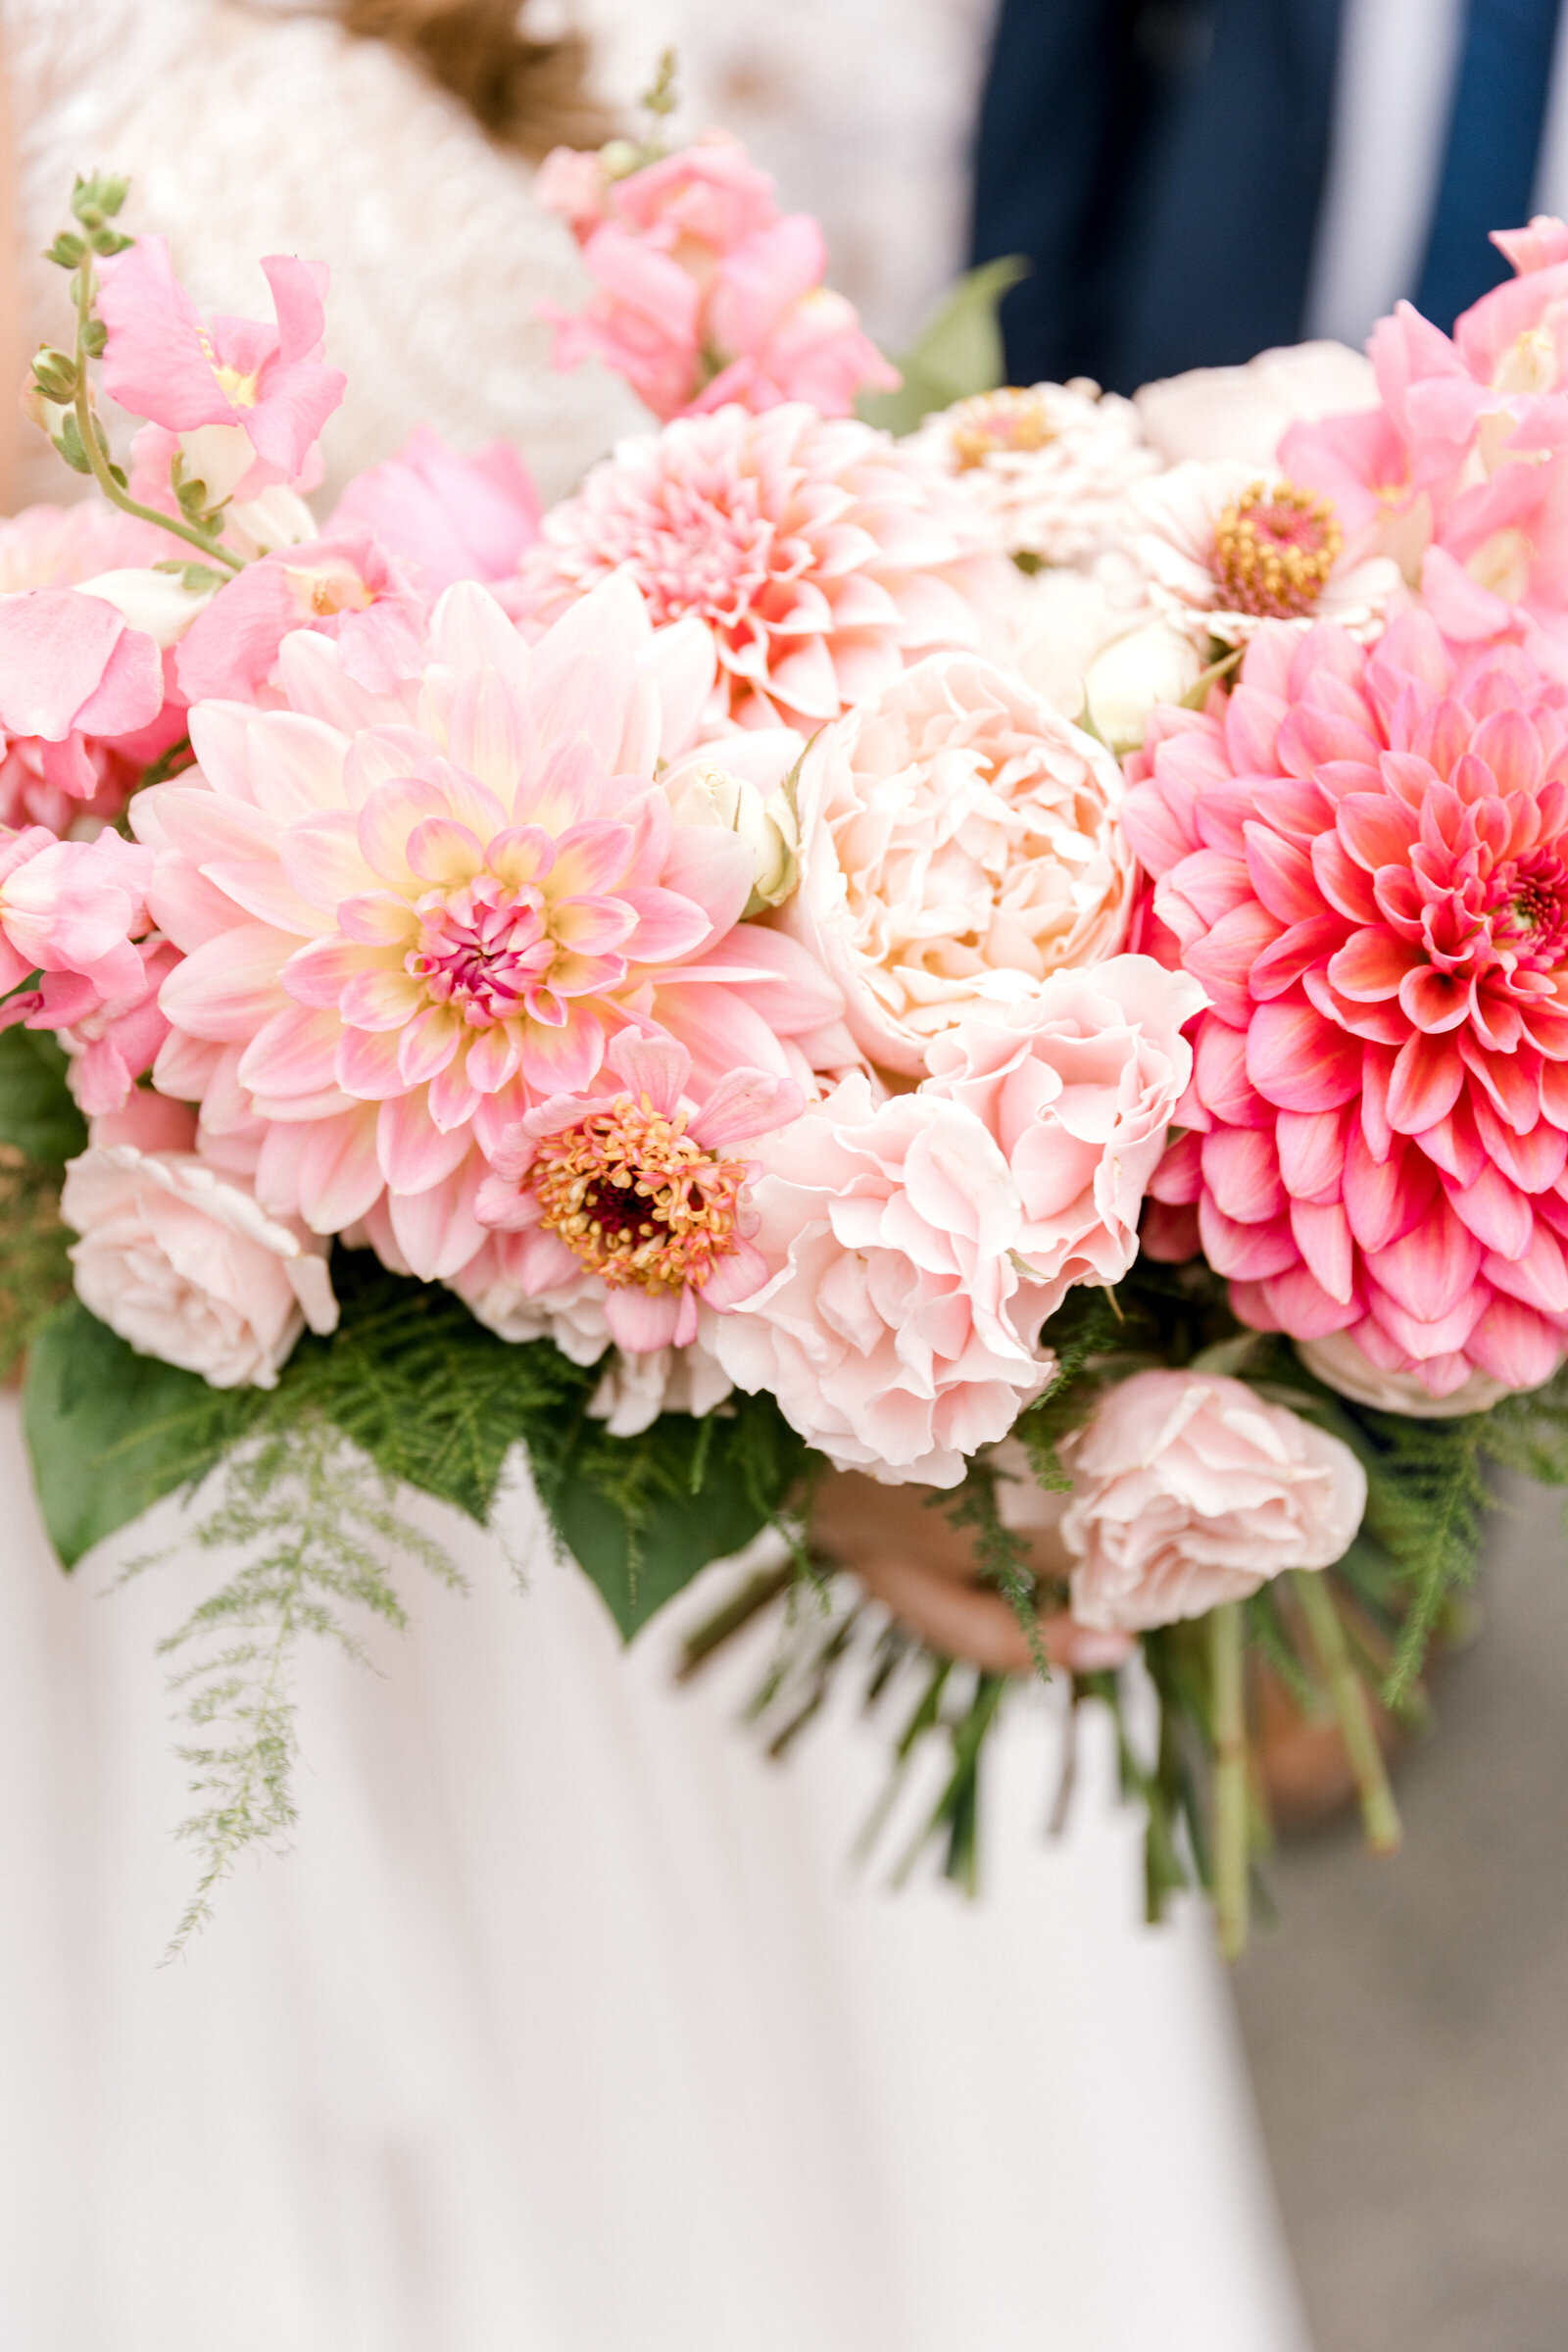 A bridal bouquet with all shades of pink roses, dahlias, spray roses and zinnias.